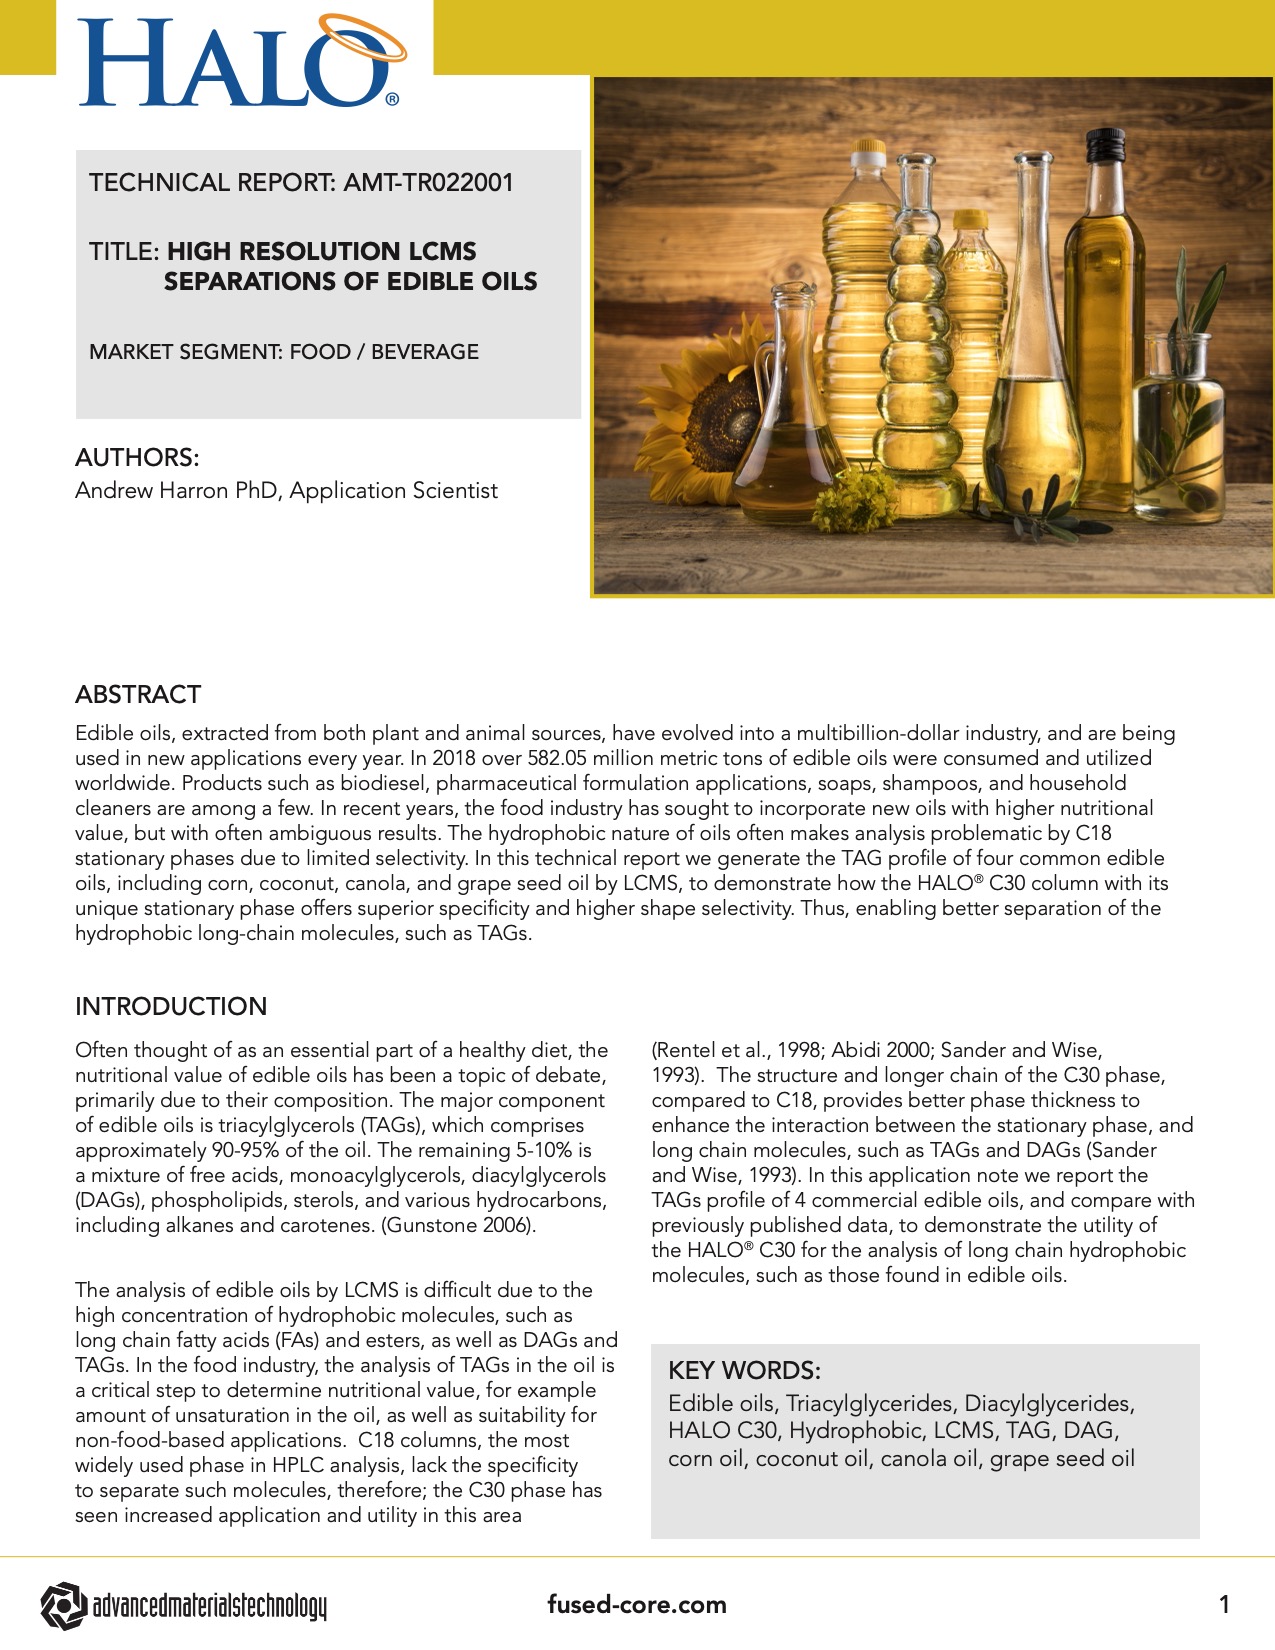 high resolution lcms separations of edible oils